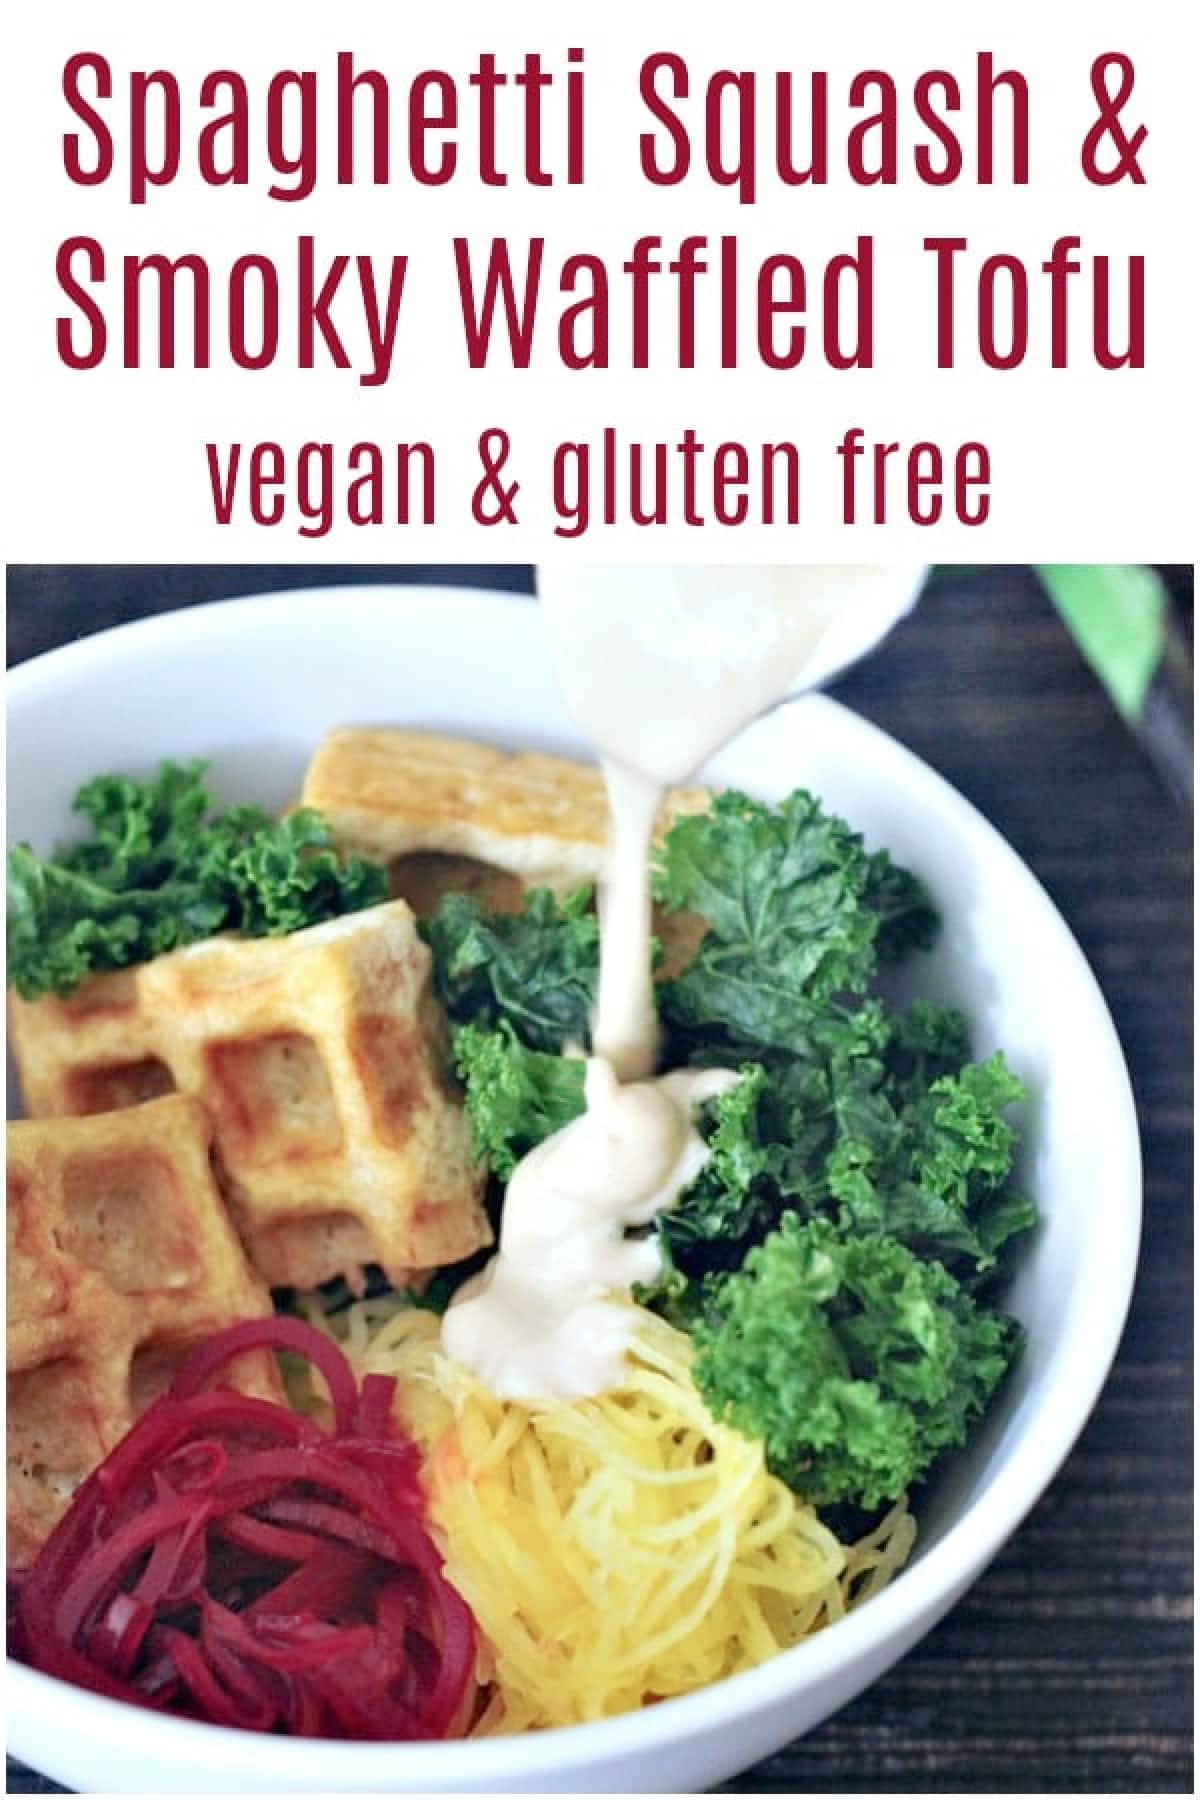 Veggie bowl with waffled tofu (spaghetti squash, roasted beet ribbons, marinated kale, and tofu cooked in the waffle maker) with a tahini sauce drizzled over top.